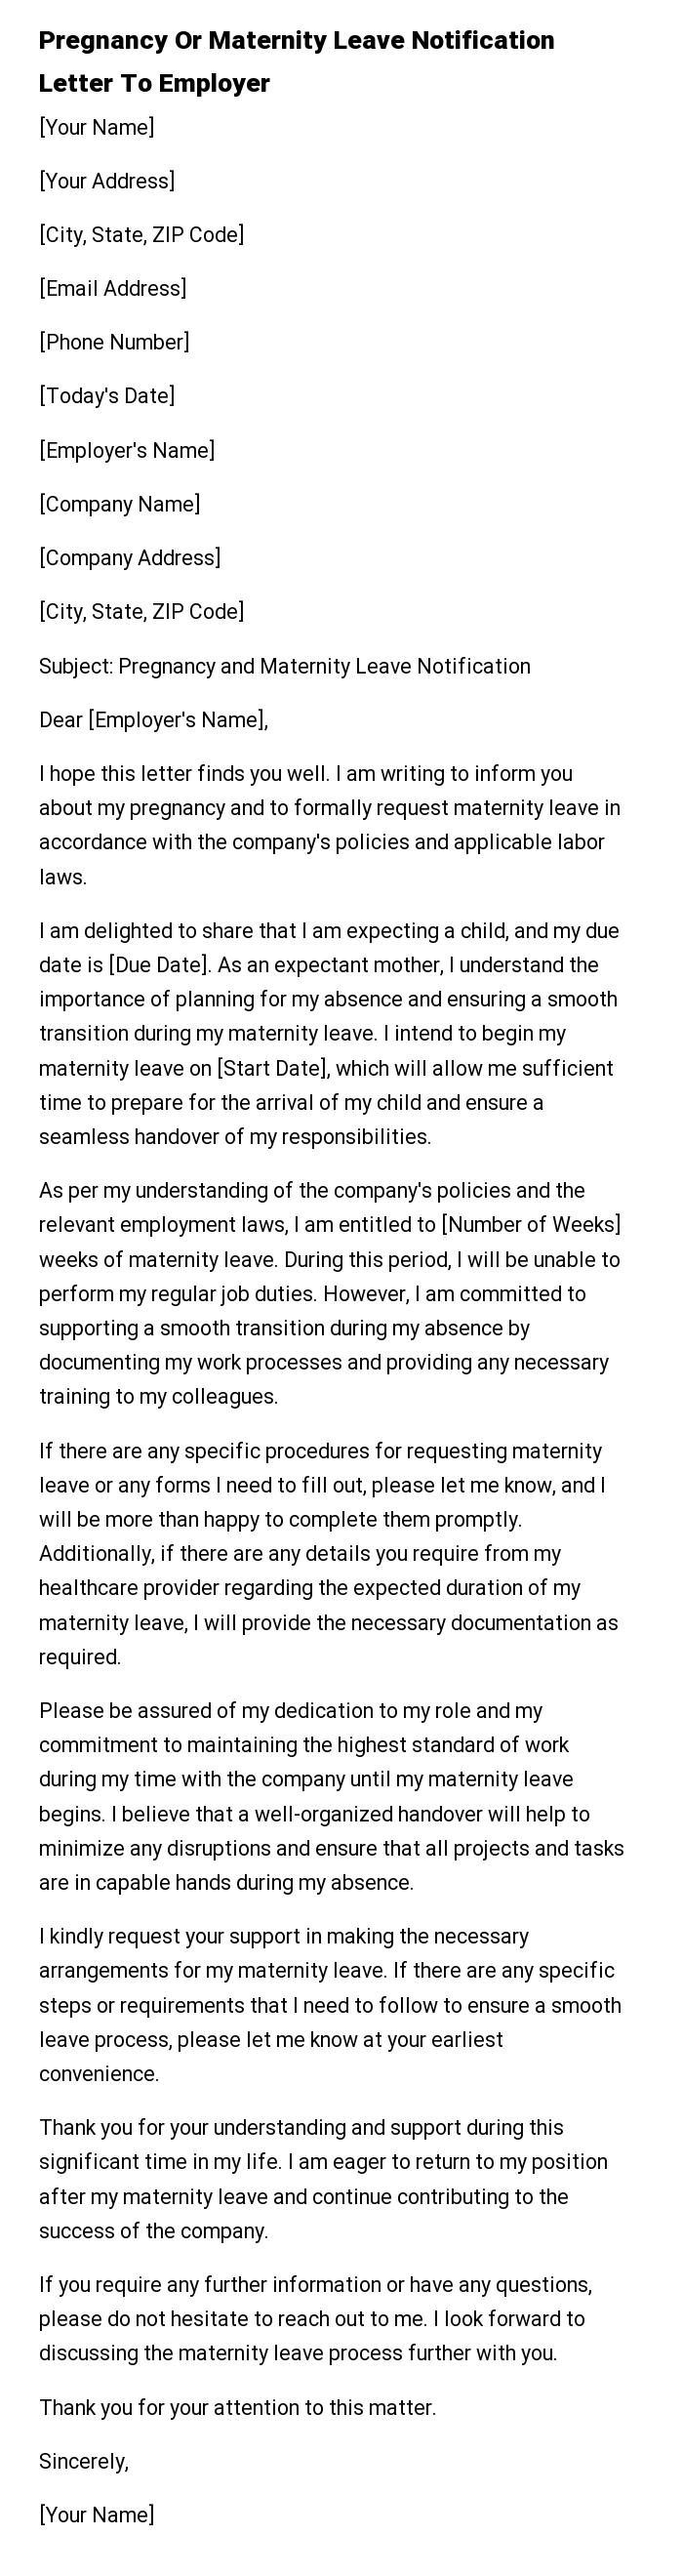 Pregnancy Or Maternity Leave Notification Letter To Employer